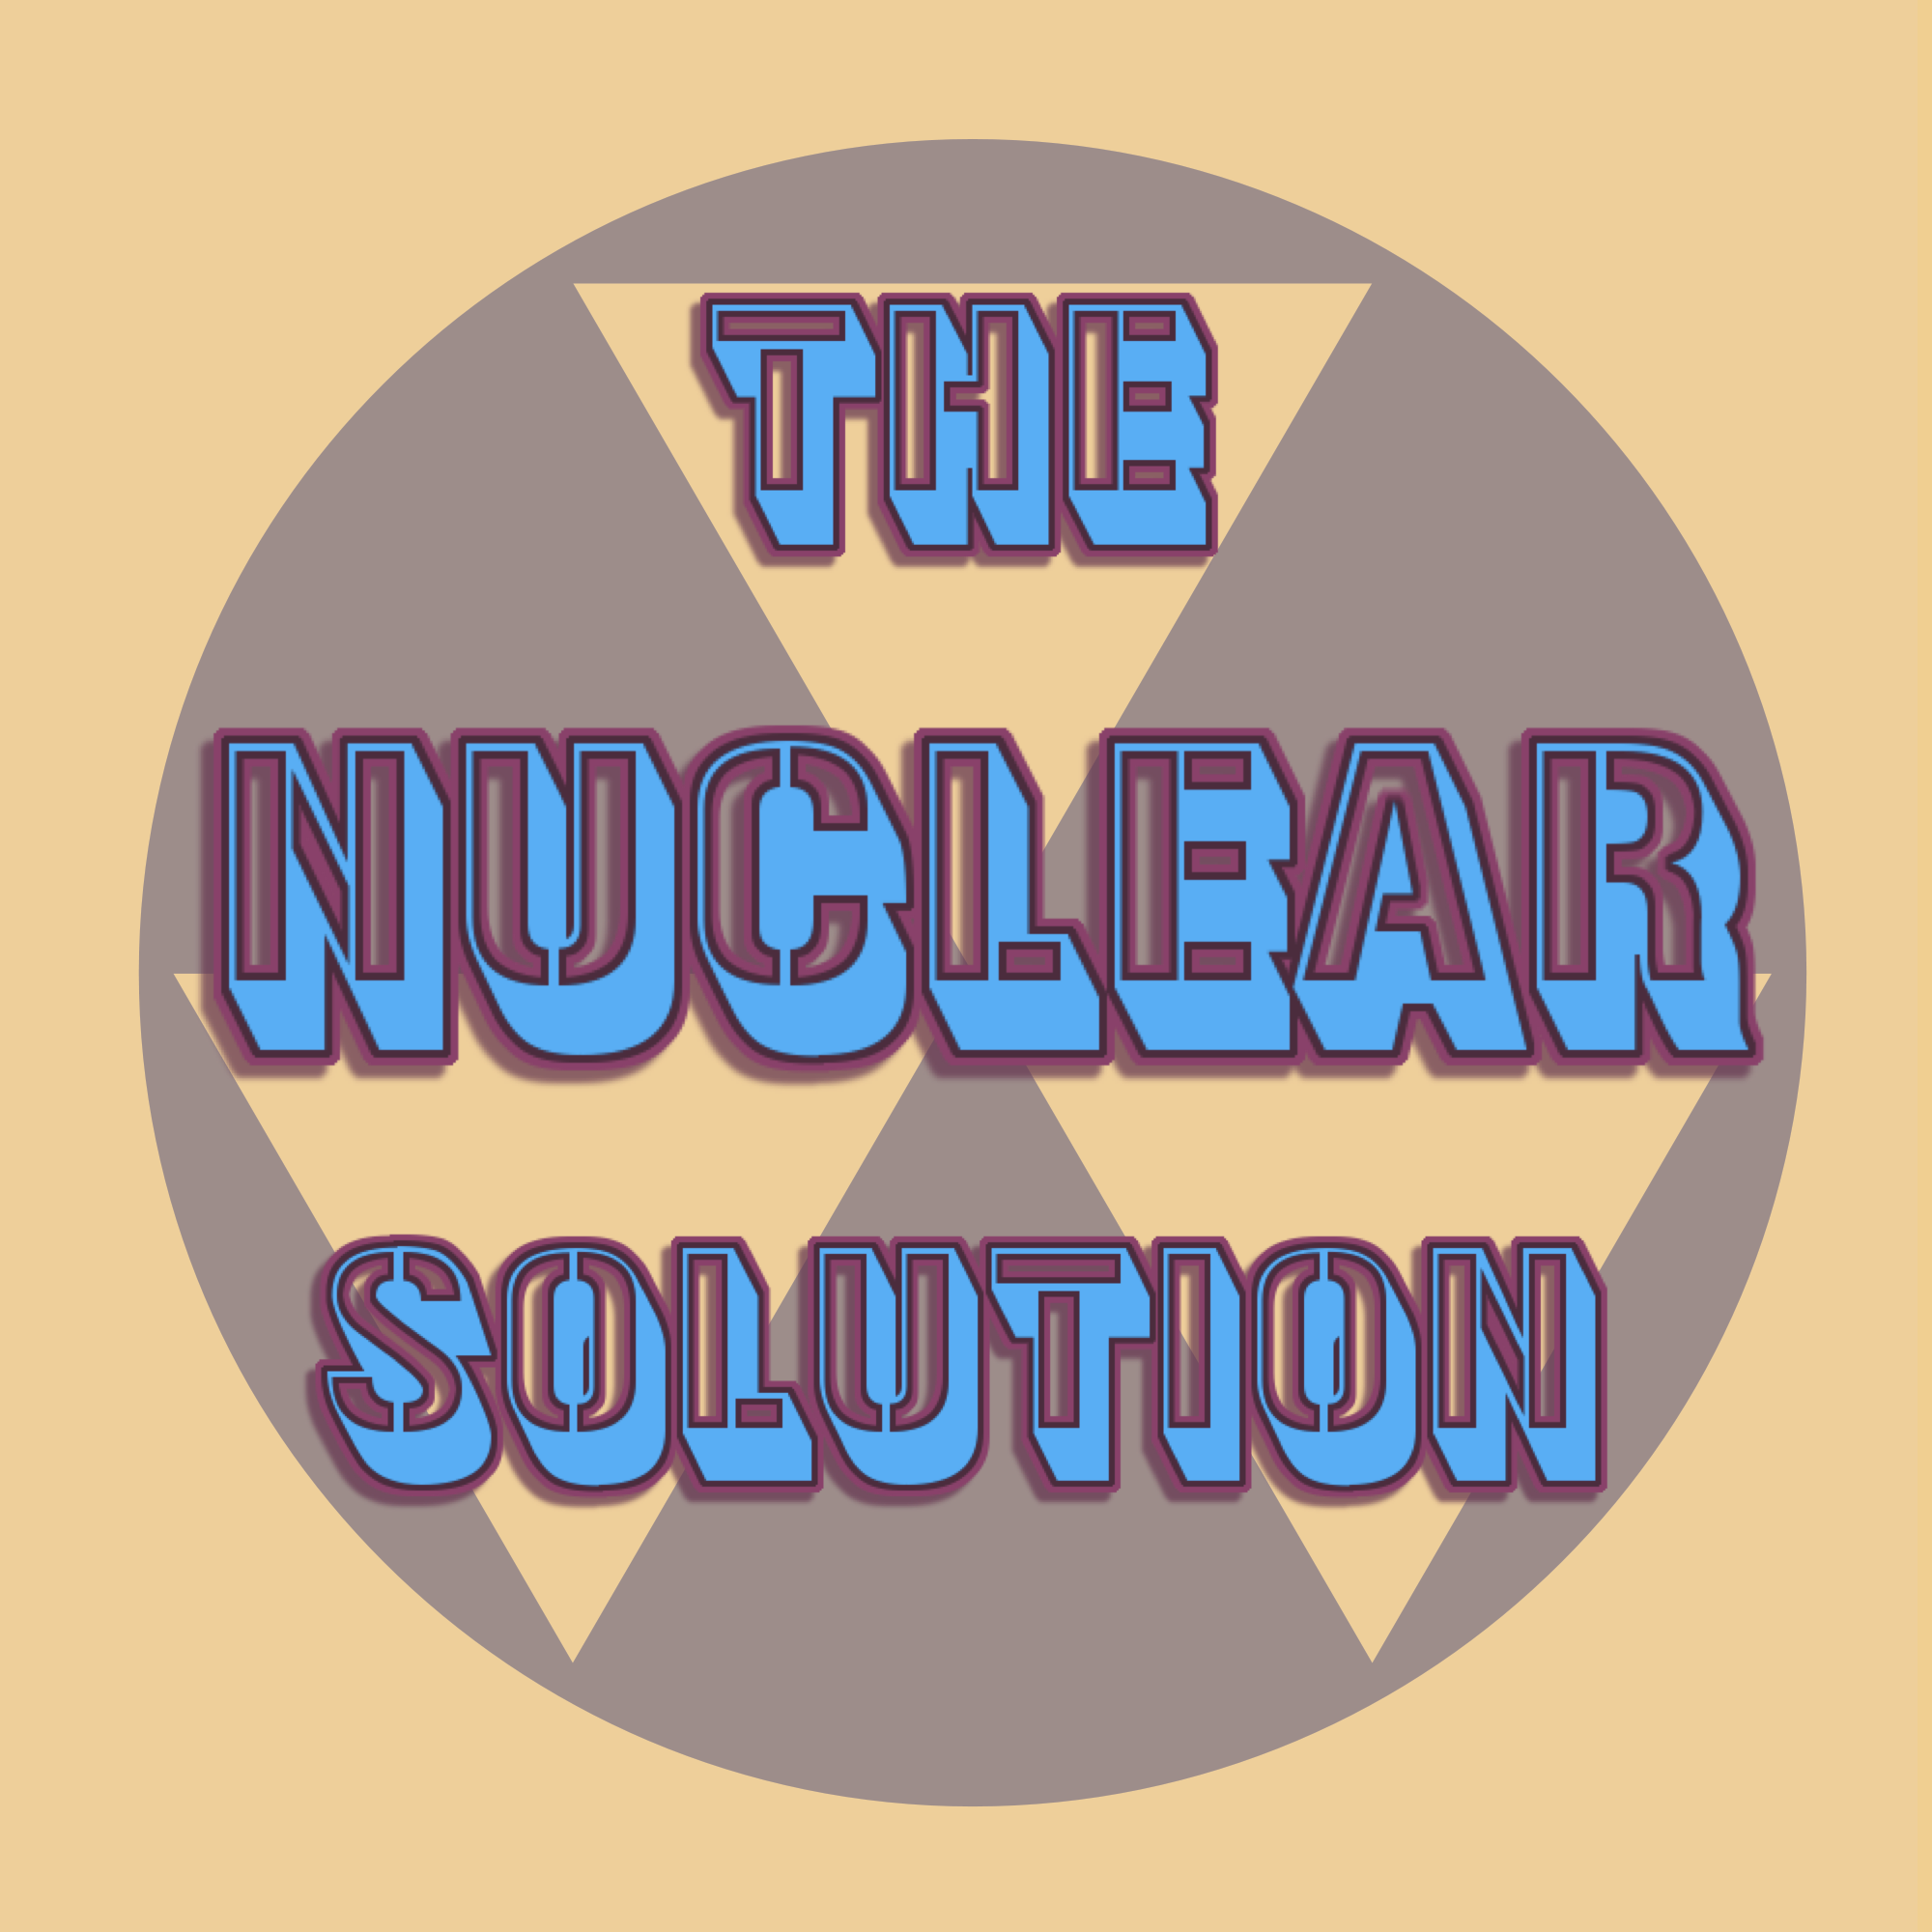 The Nuclear Solution